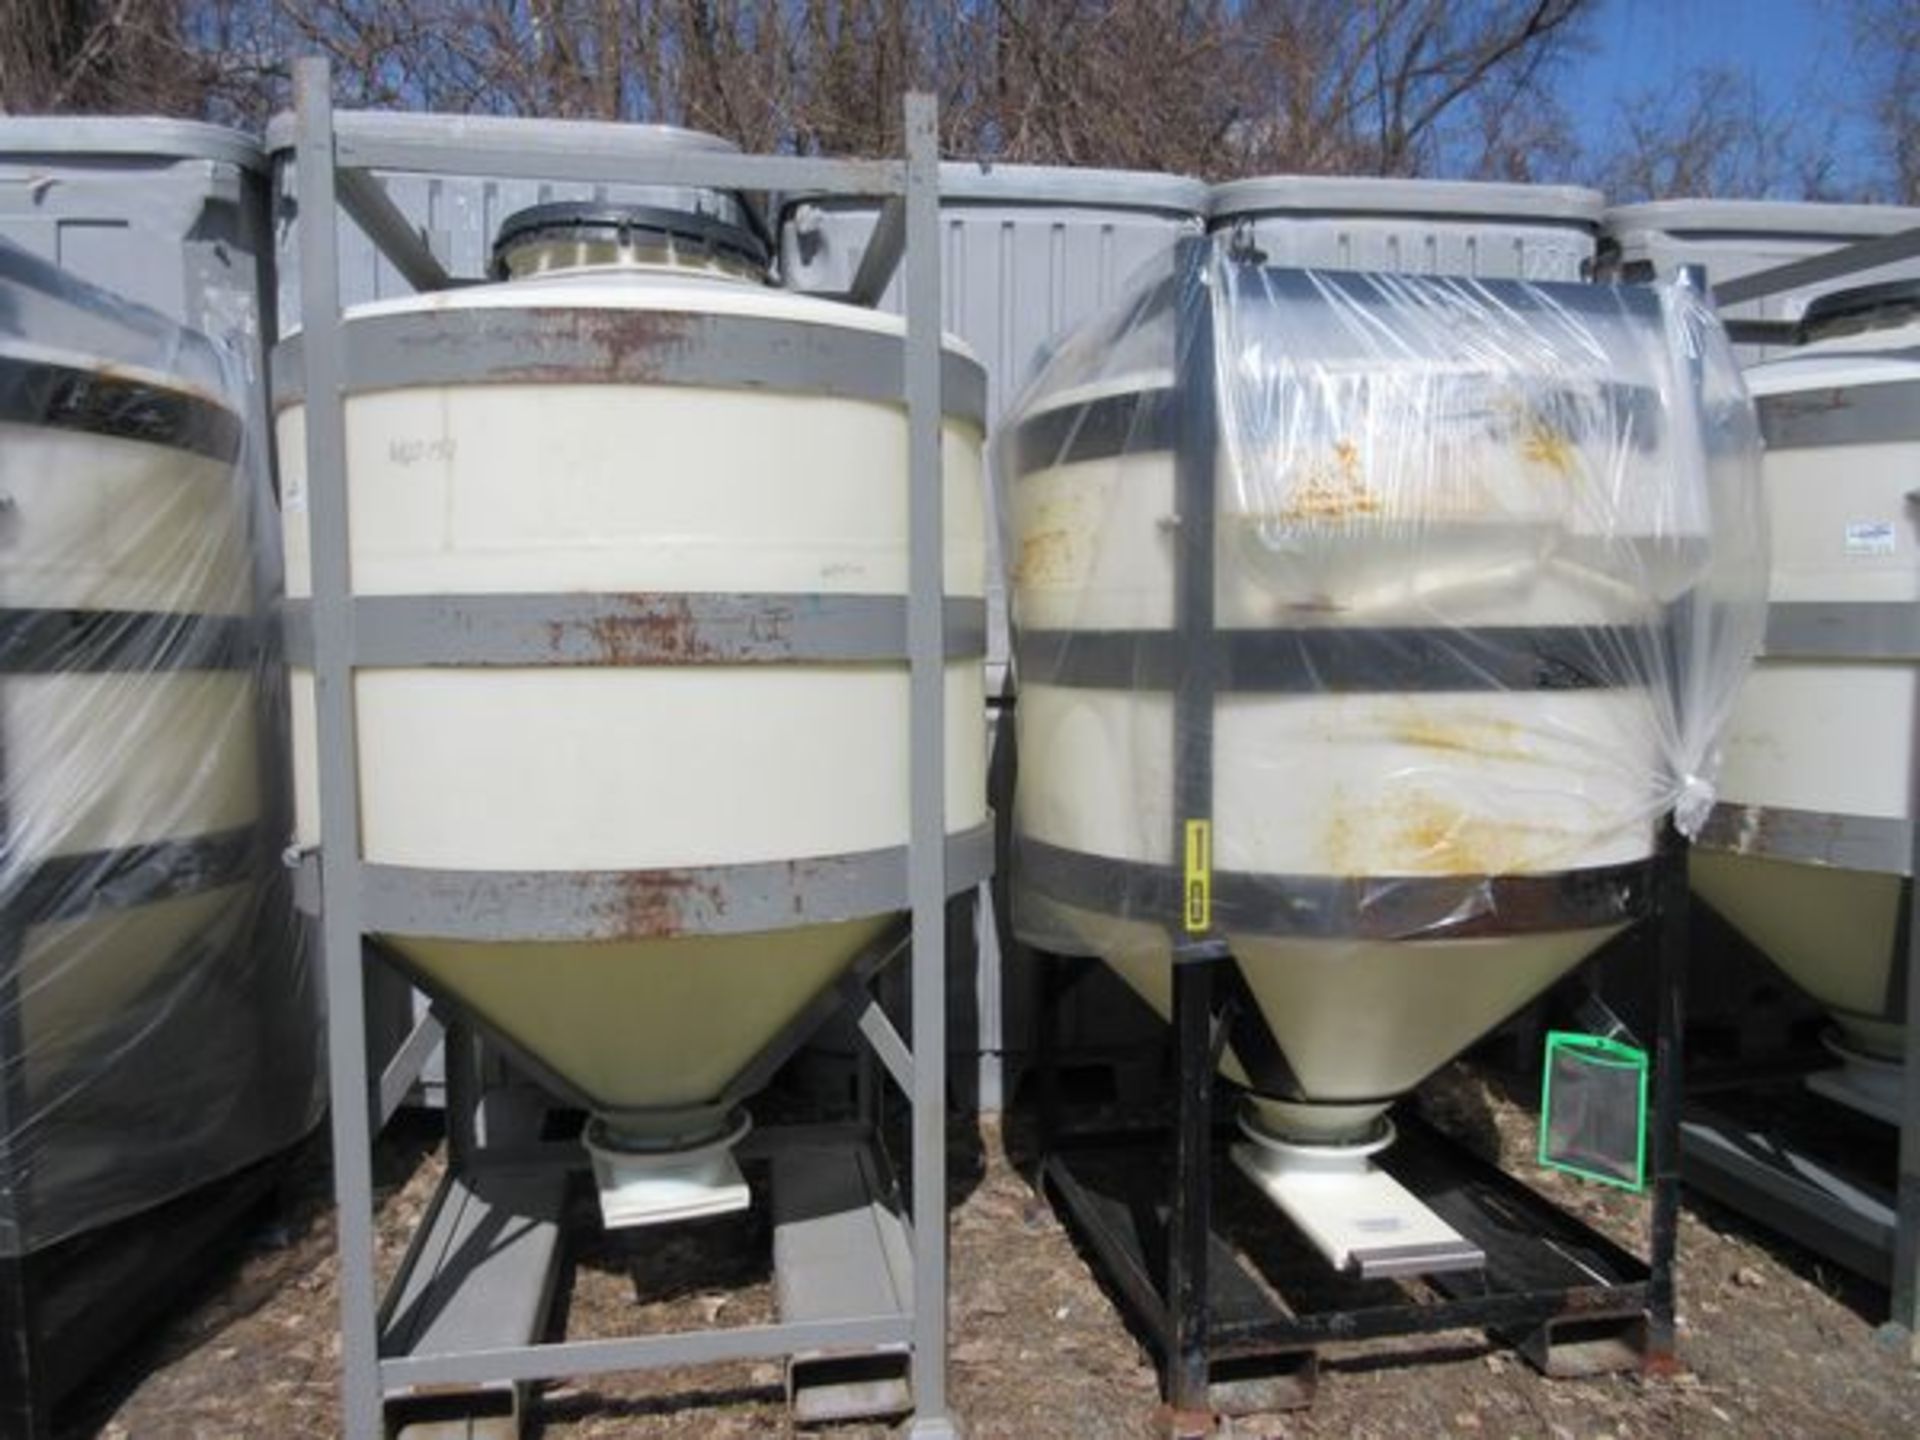 LOT (2) Vertical High Density Polyethylene Discharge Tanks w/Stand and Slide Gate, P | Rig Fee $25